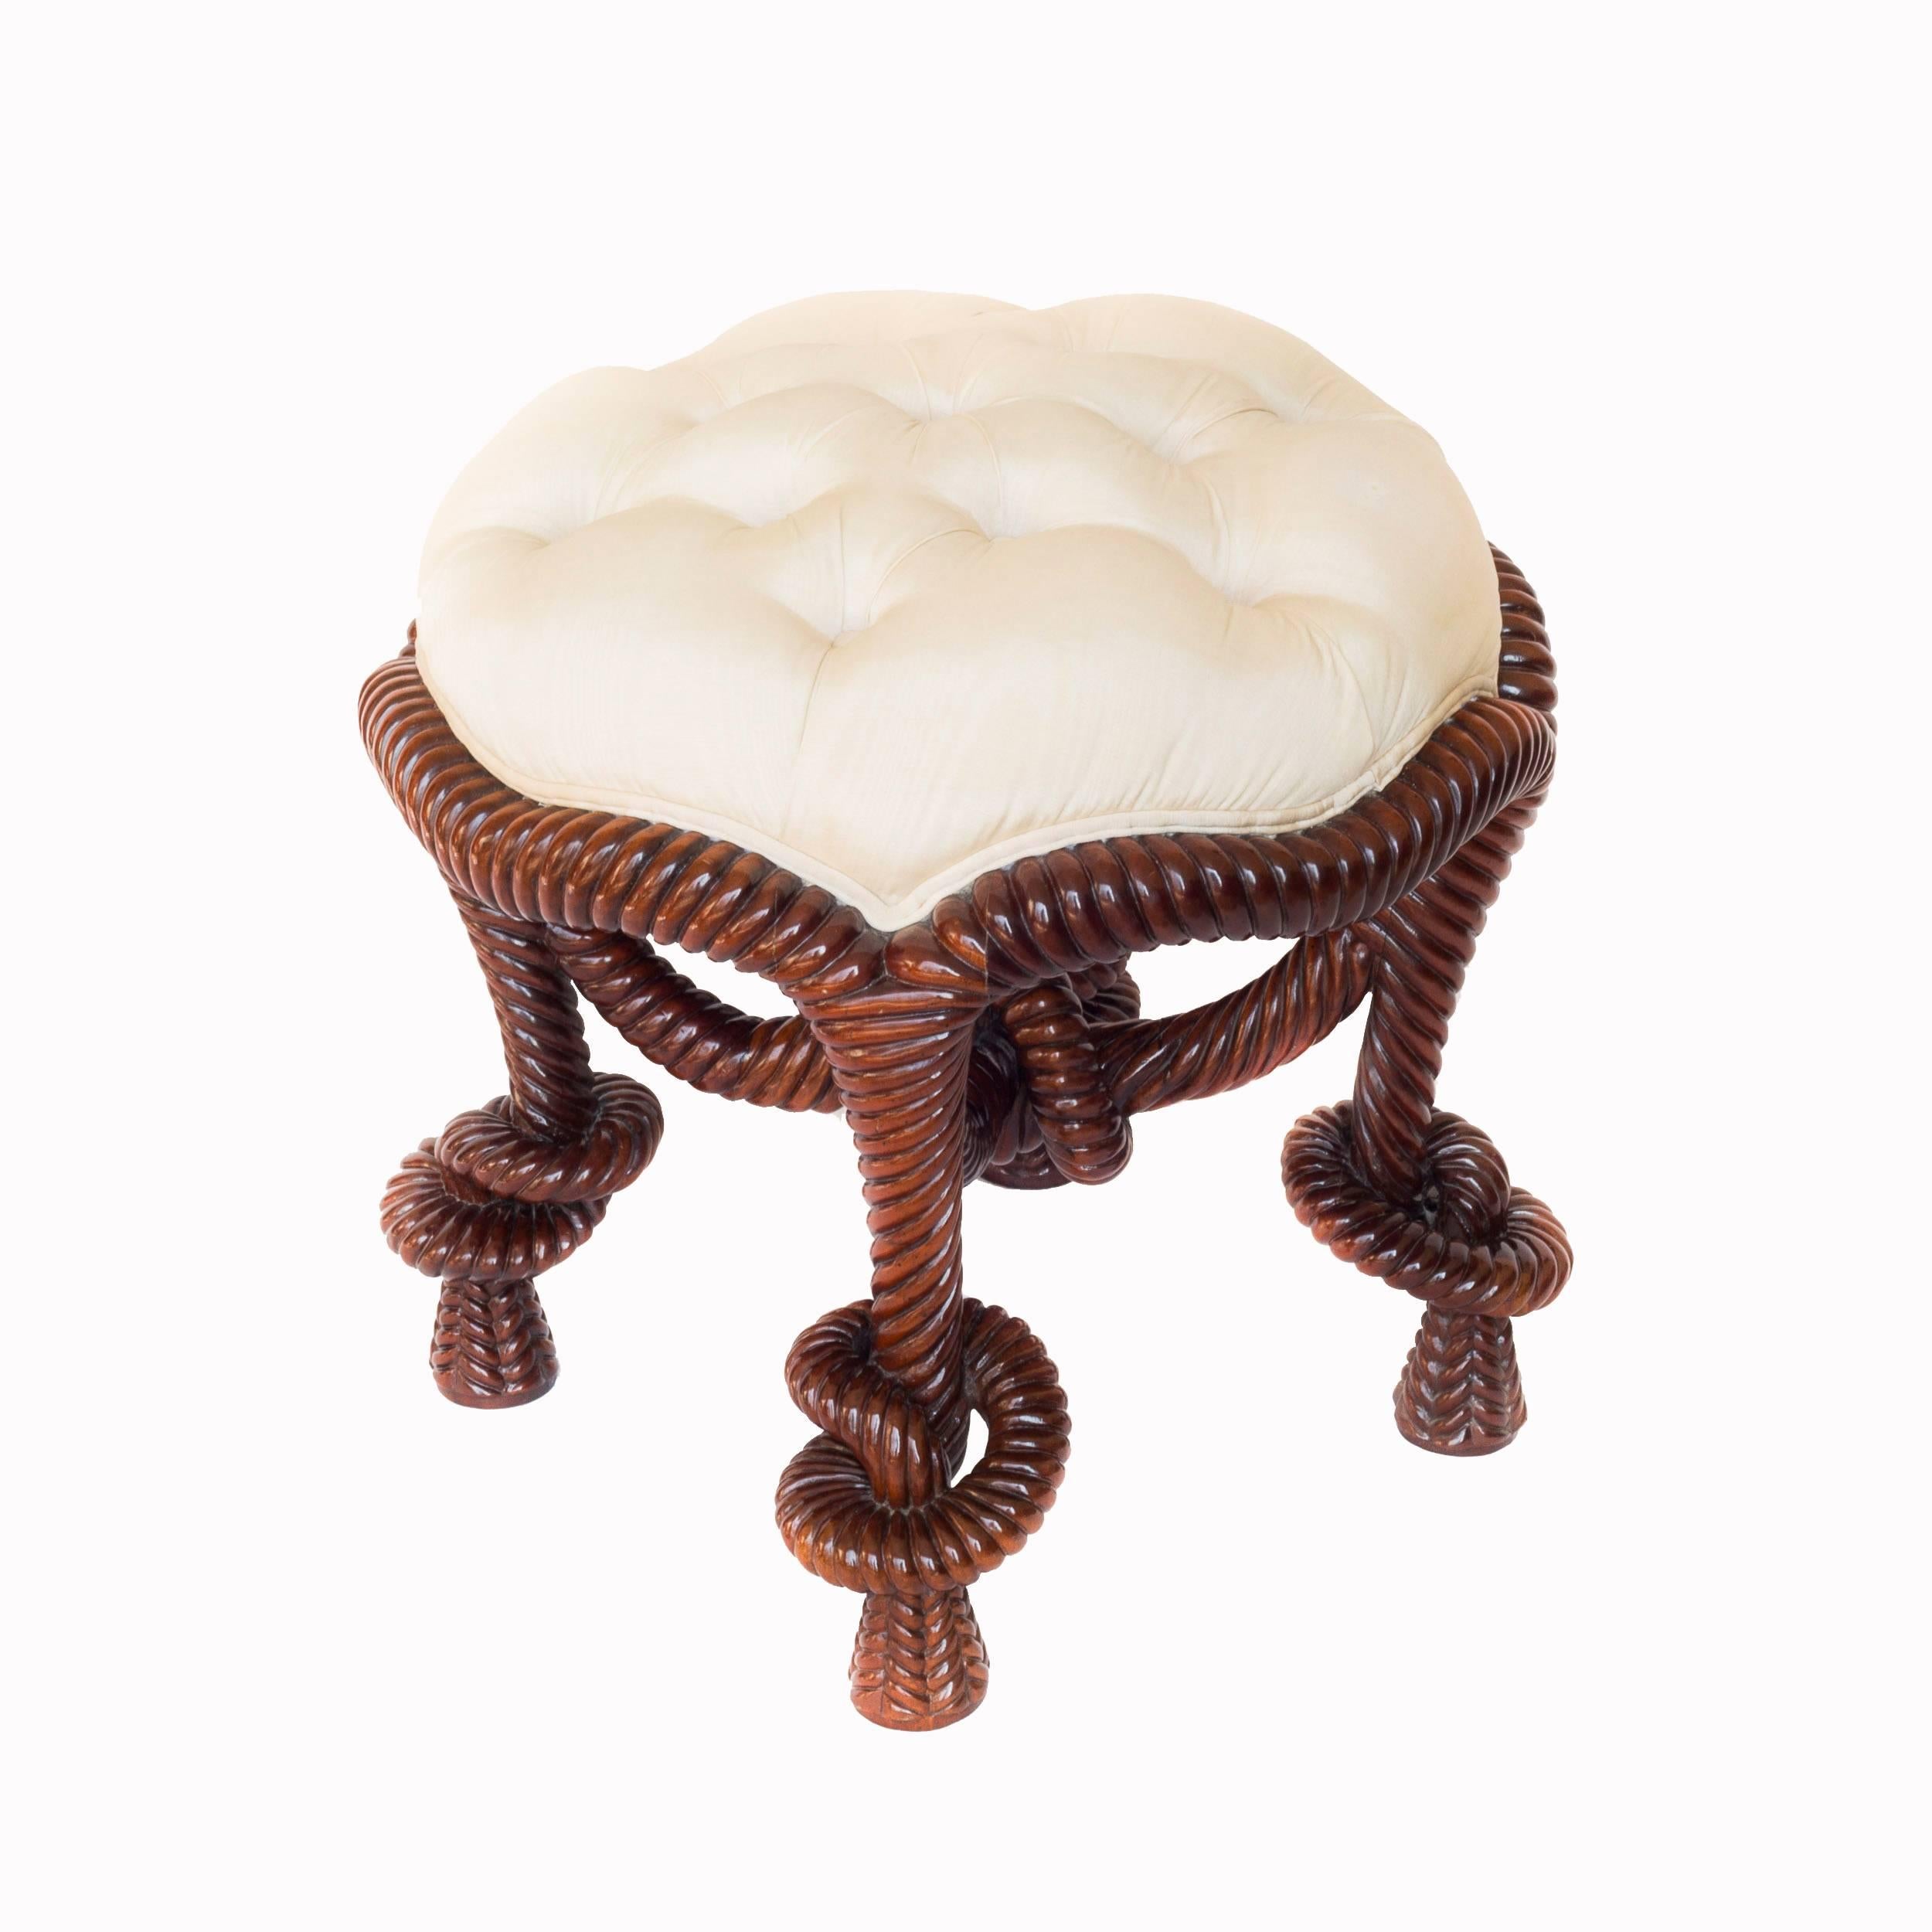 A fabulous French Napoleon III style mahogany rope-twist ladies' dressing stool, after the design by A.M.E. Fournier, 
French, 20th century.

With cream moire silk covered deep-button tufted seat over profusely carved and pierced mahogany frame,